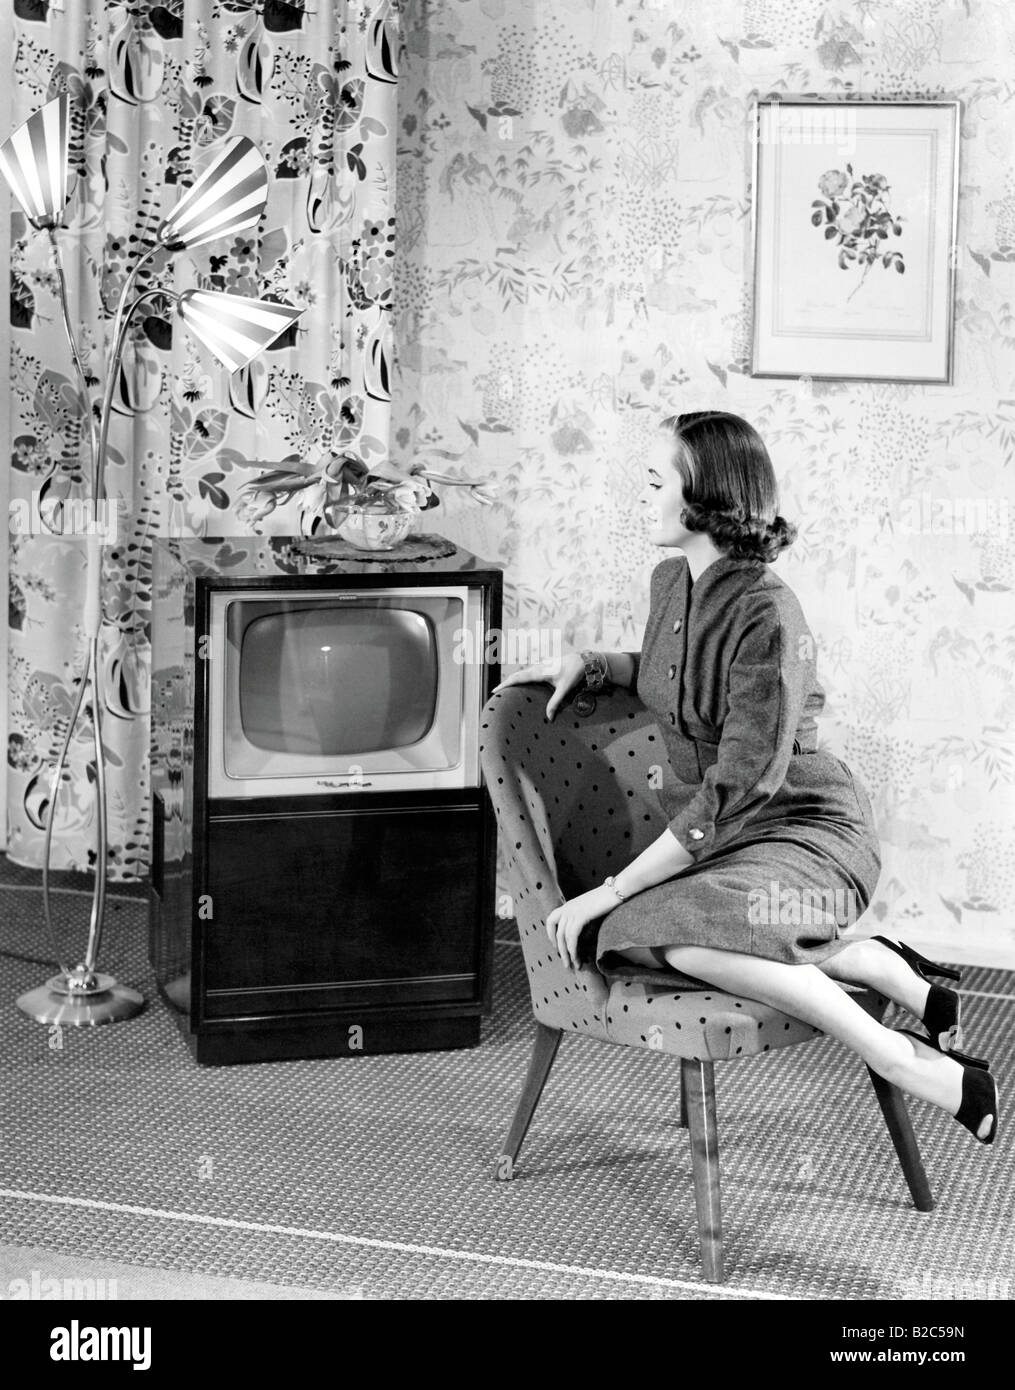 Woman posing next to a television, historic picture from about 1955 Stock Photo